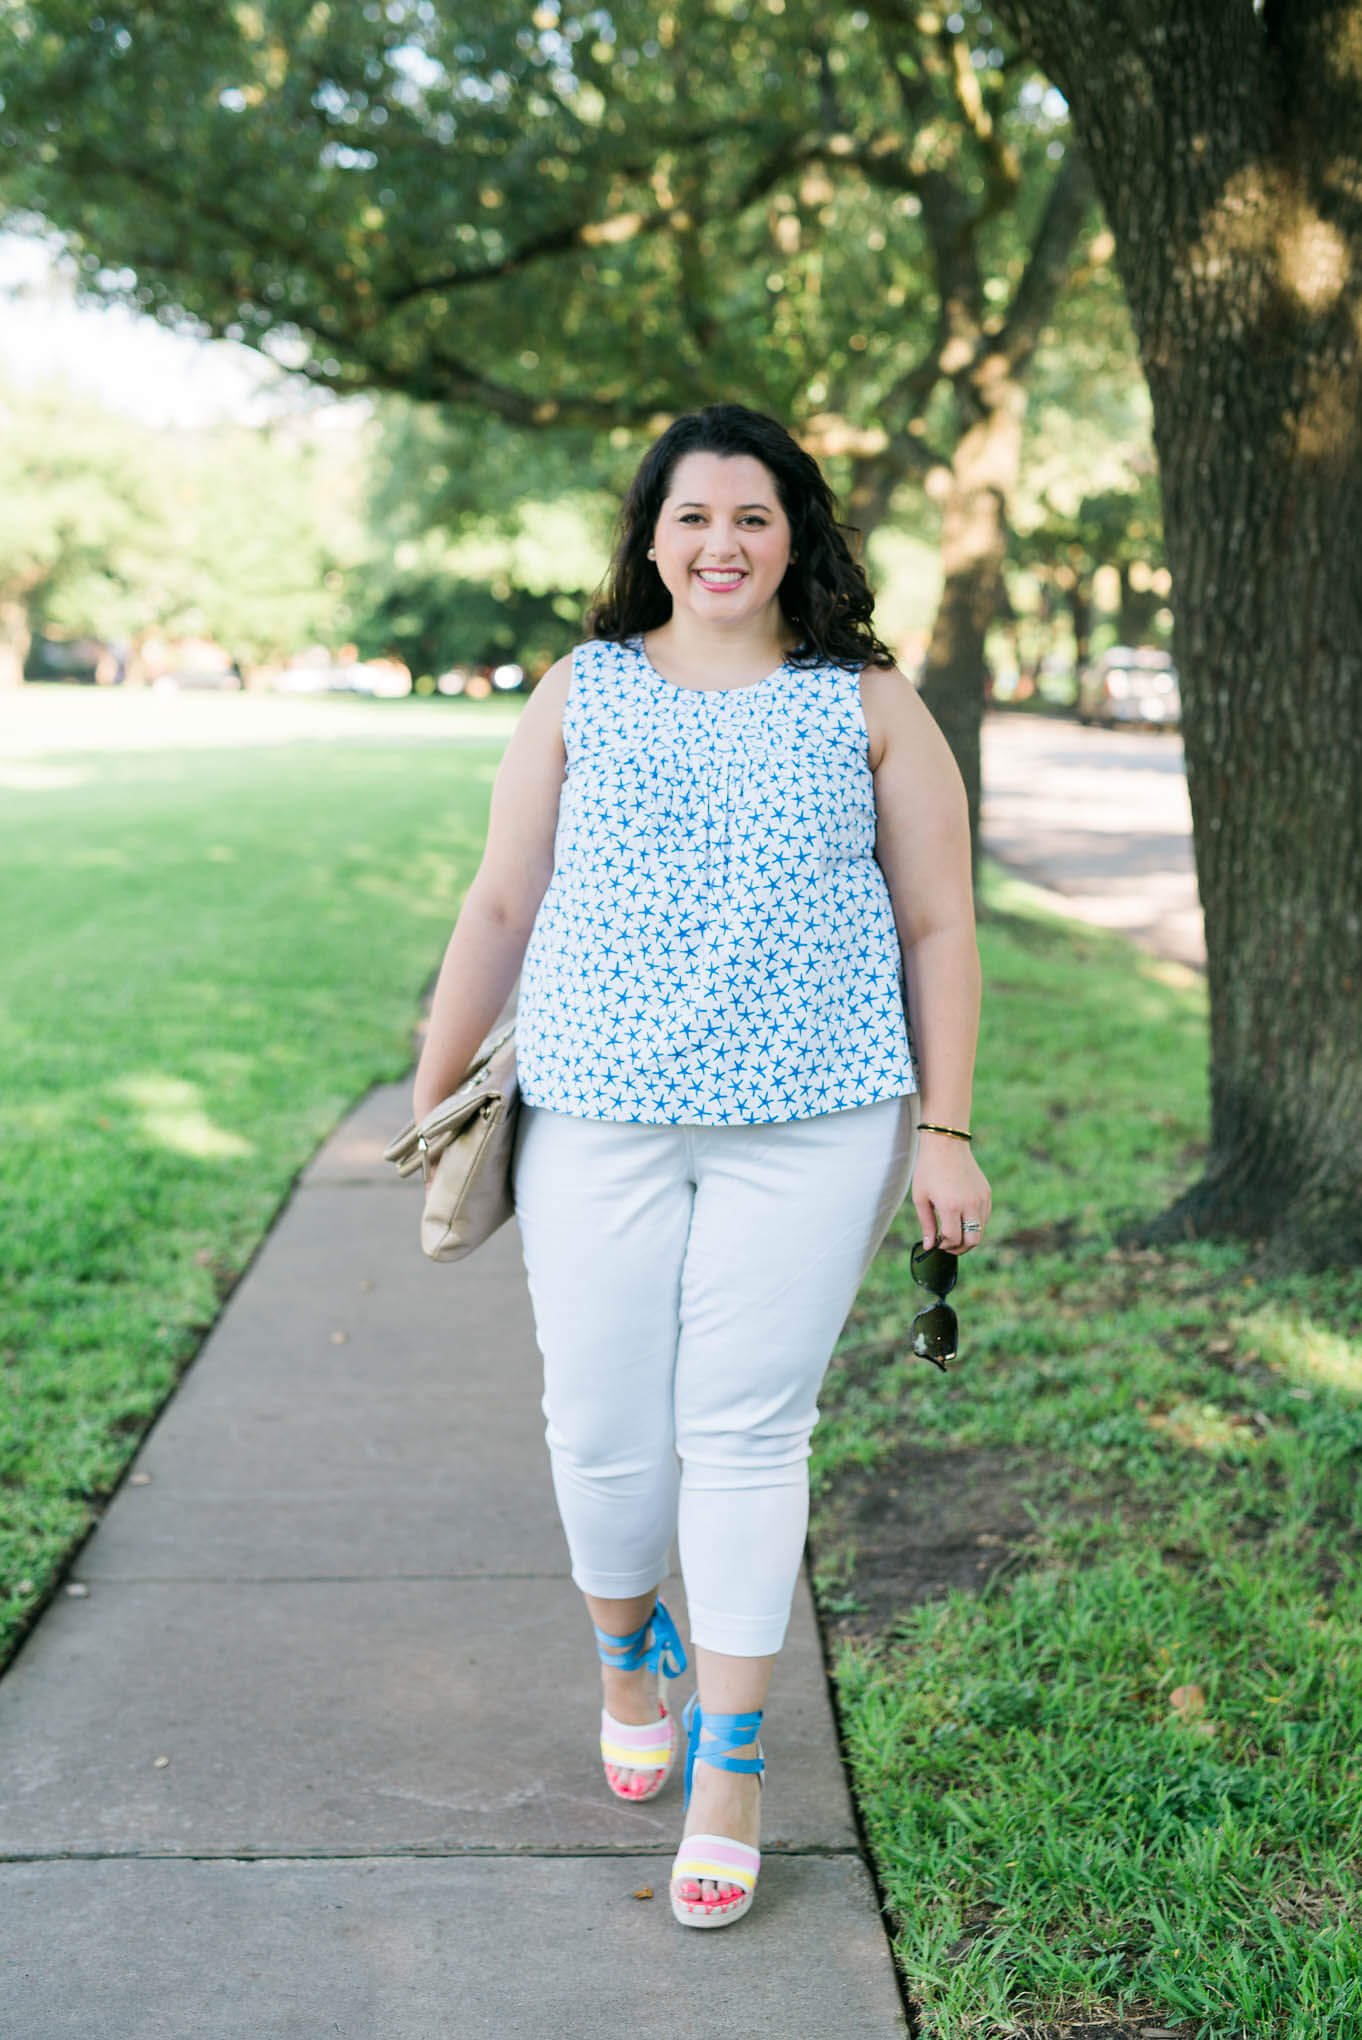 Kate Spade Summer Fun | Something Gold, Something Blue curvy style blog by Emily Bastedo | Plus Size Fashion, Summer fashion, What to wear in the summer, Kate Spade wedges, Melissa McCarthy Seven white capris, Elaine Turner purse, Chanel sunglasses